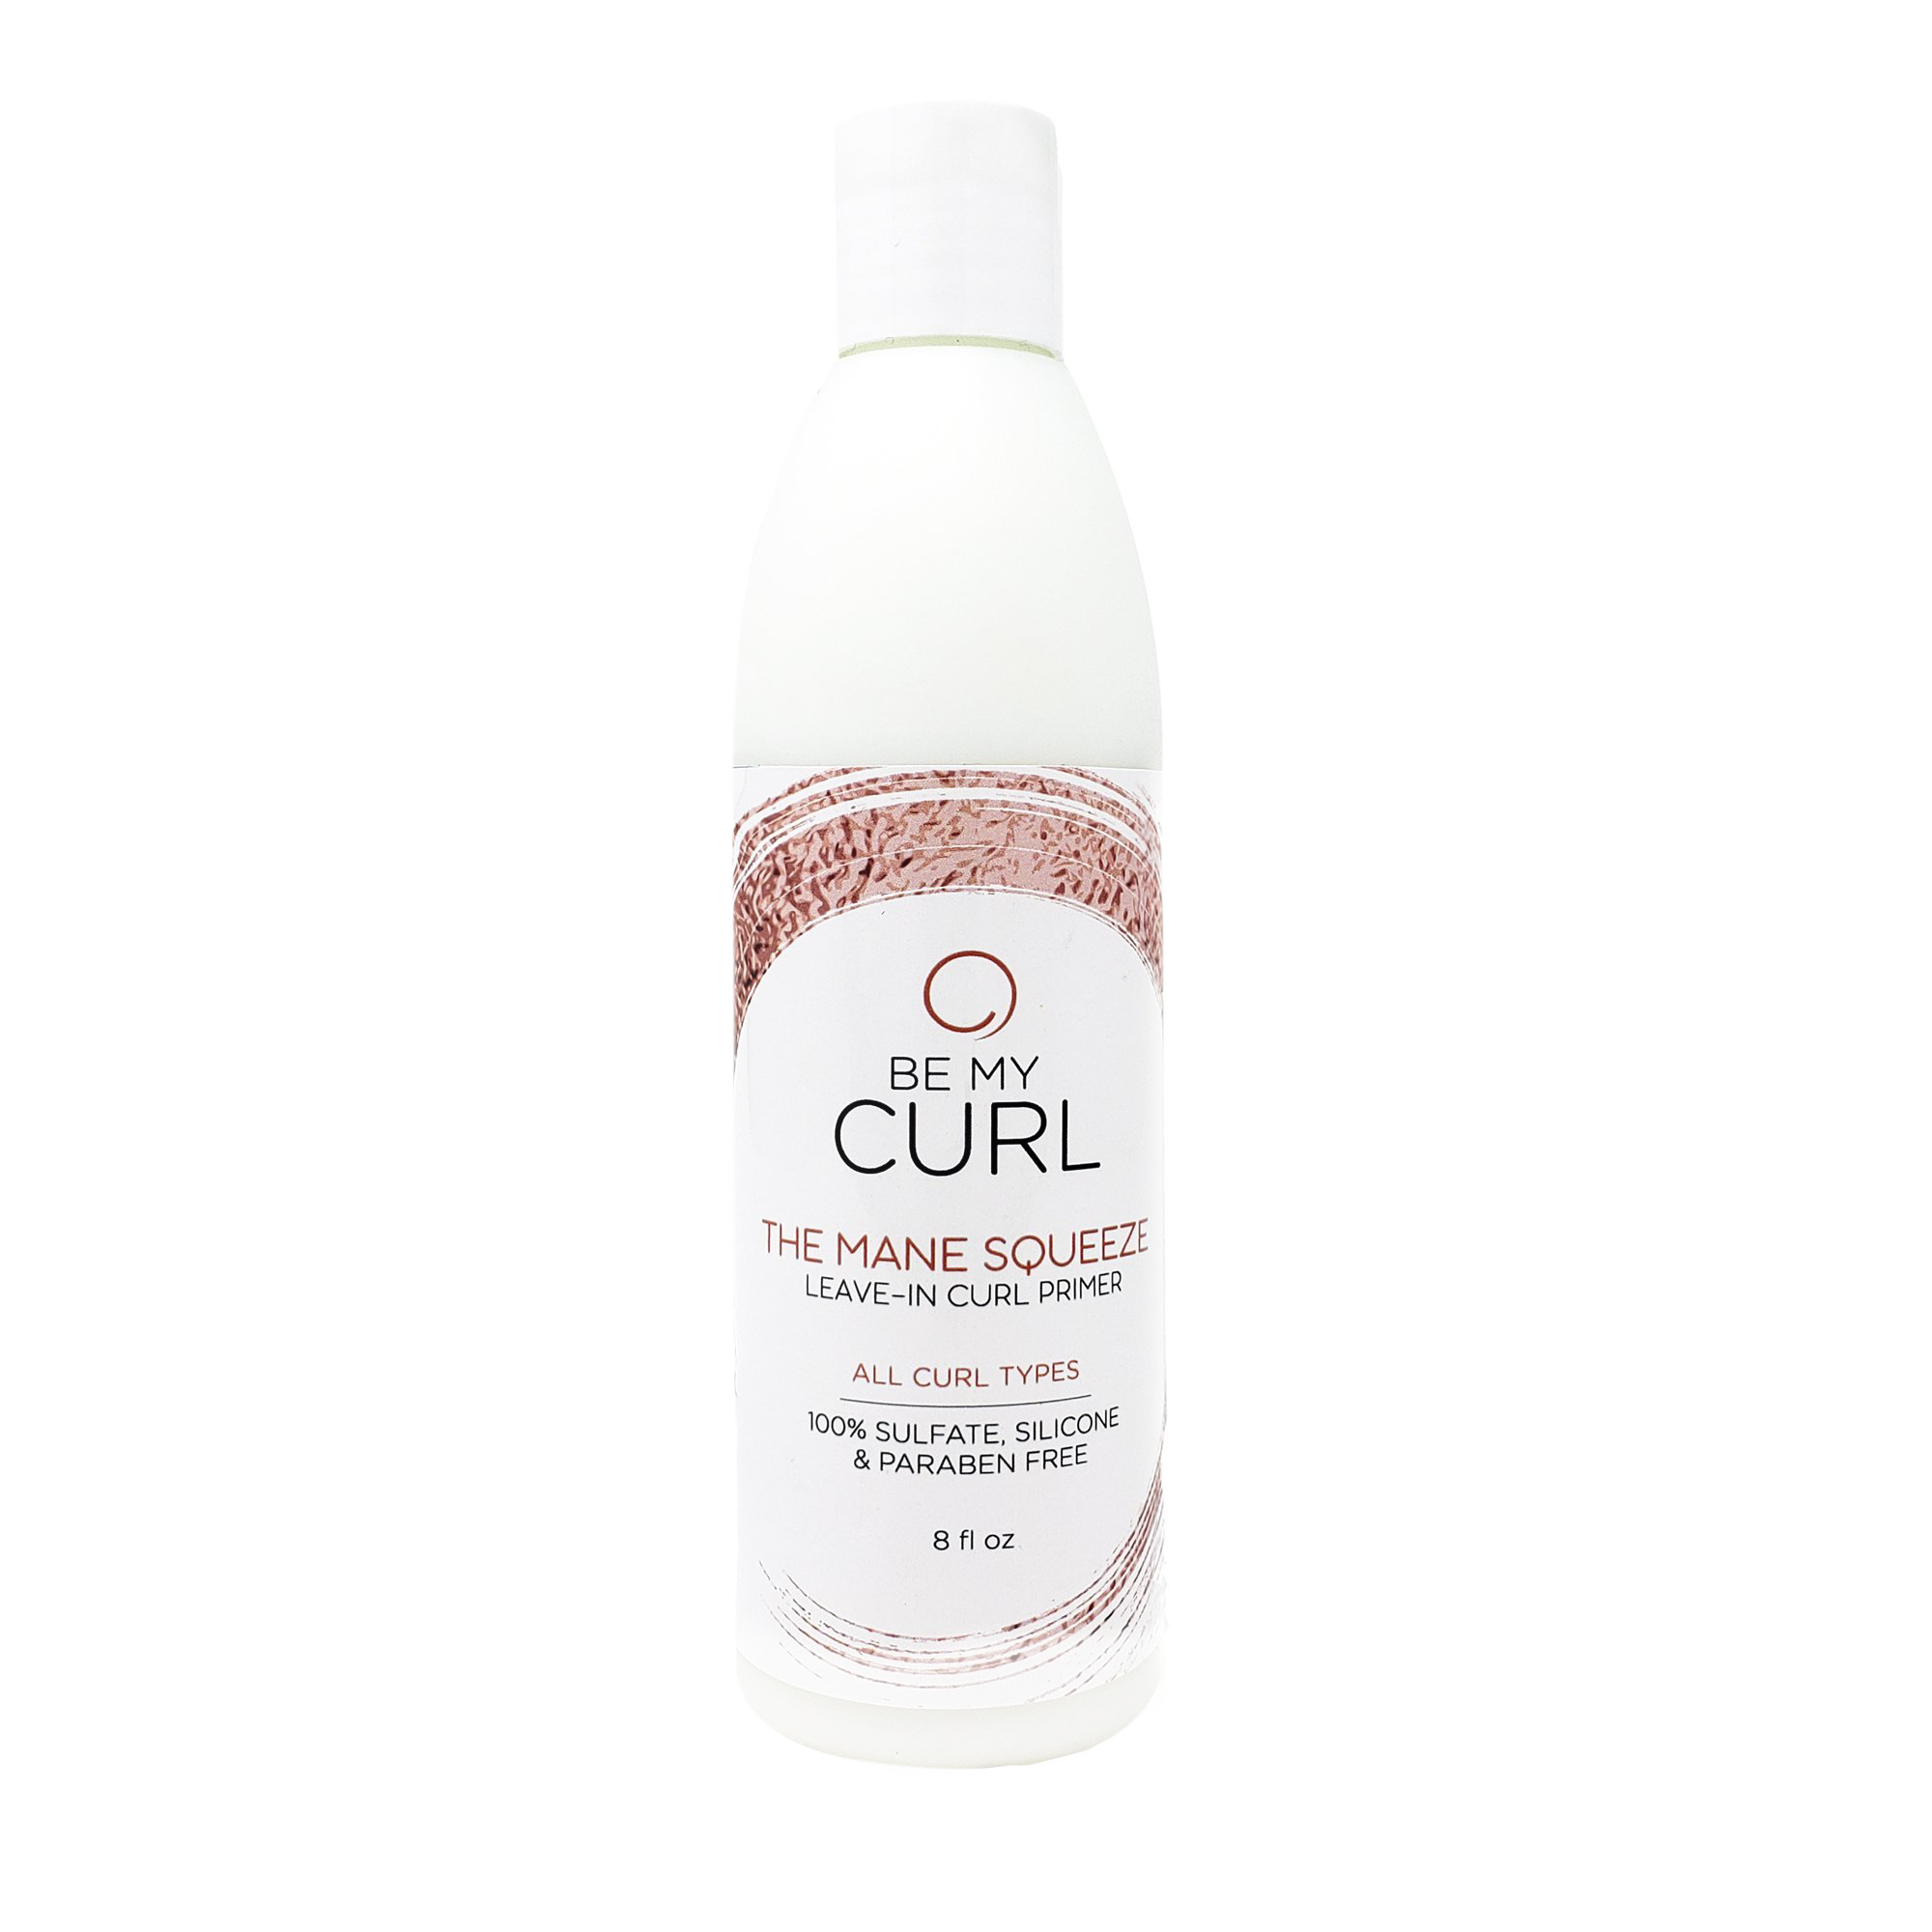 The Mane Squeeze Leave-In Curl Primer